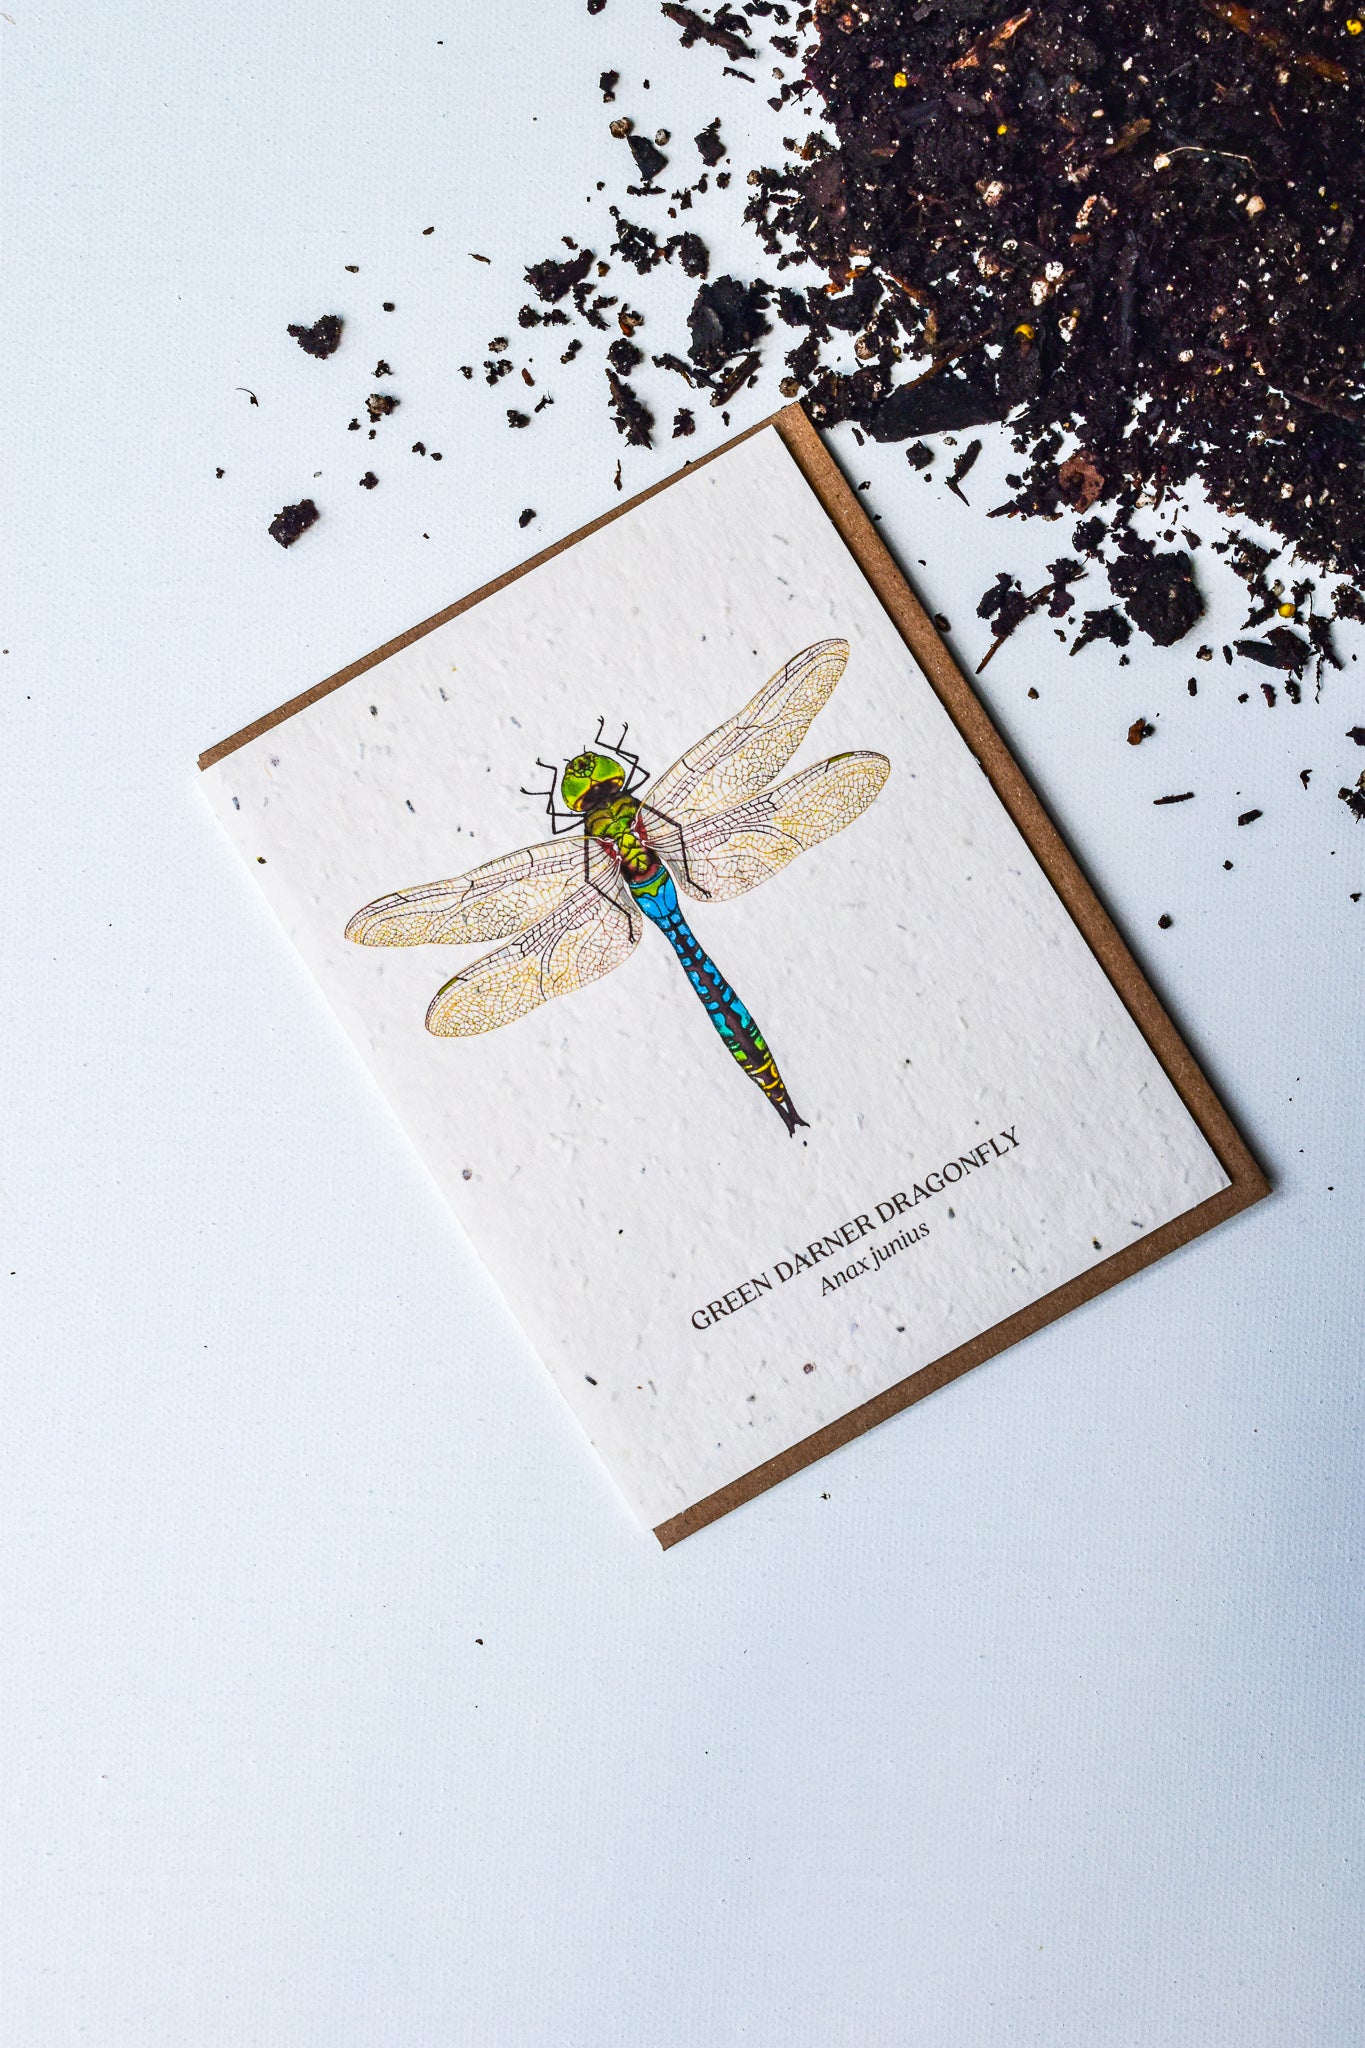 Green Darner Dragonfly Plantable Wildflower Card - Belle's Greenhouse